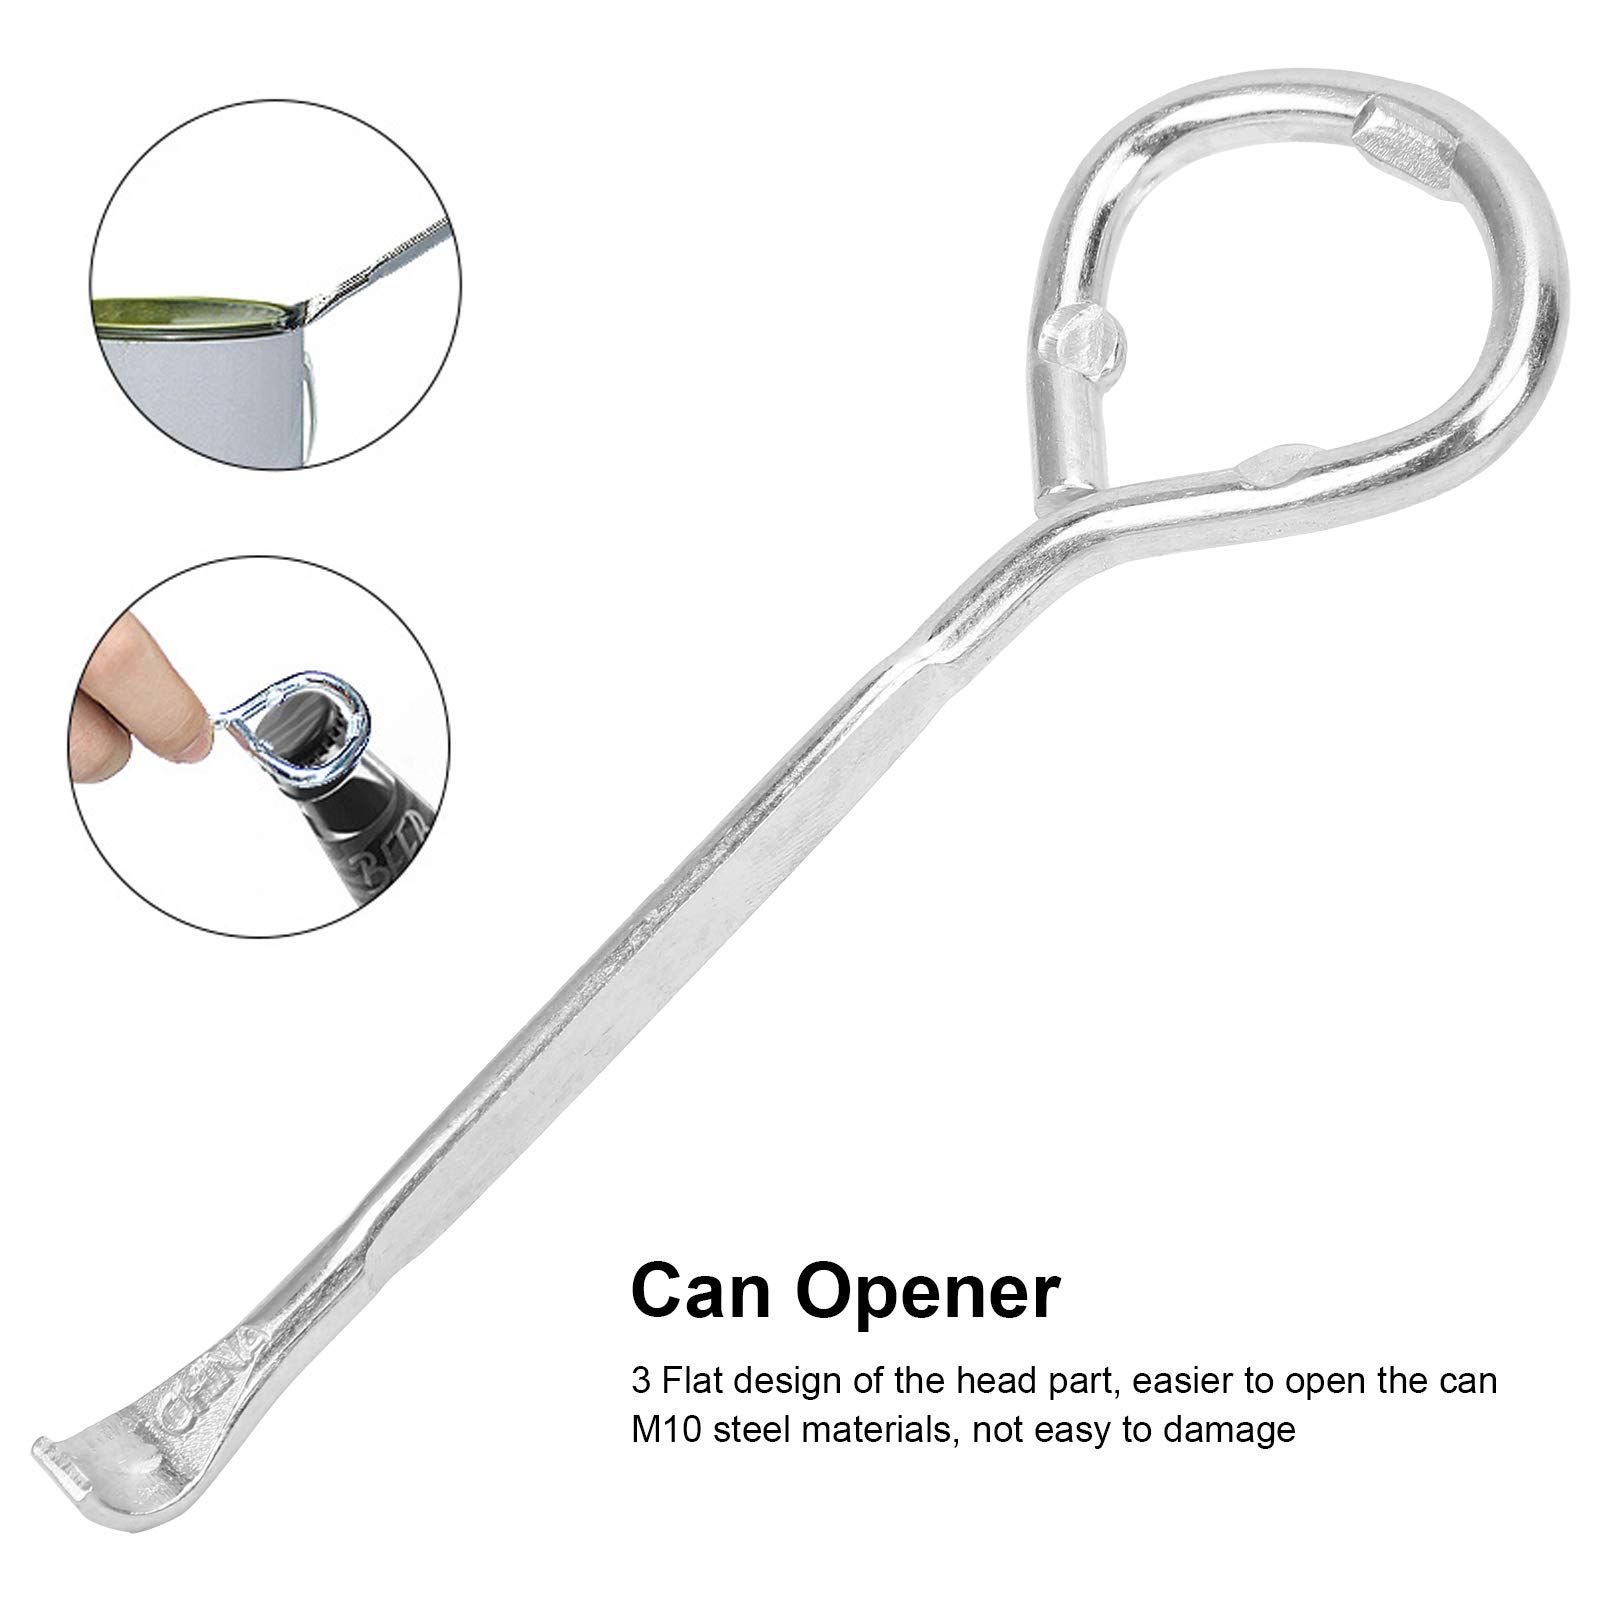 12pcs Paint Can Opener, Bottle Opener, M10 Steel Can Opener MultiFunctional Paint Bucket Can Opener Bottle Opener for Paint Barrels, Beer Cans